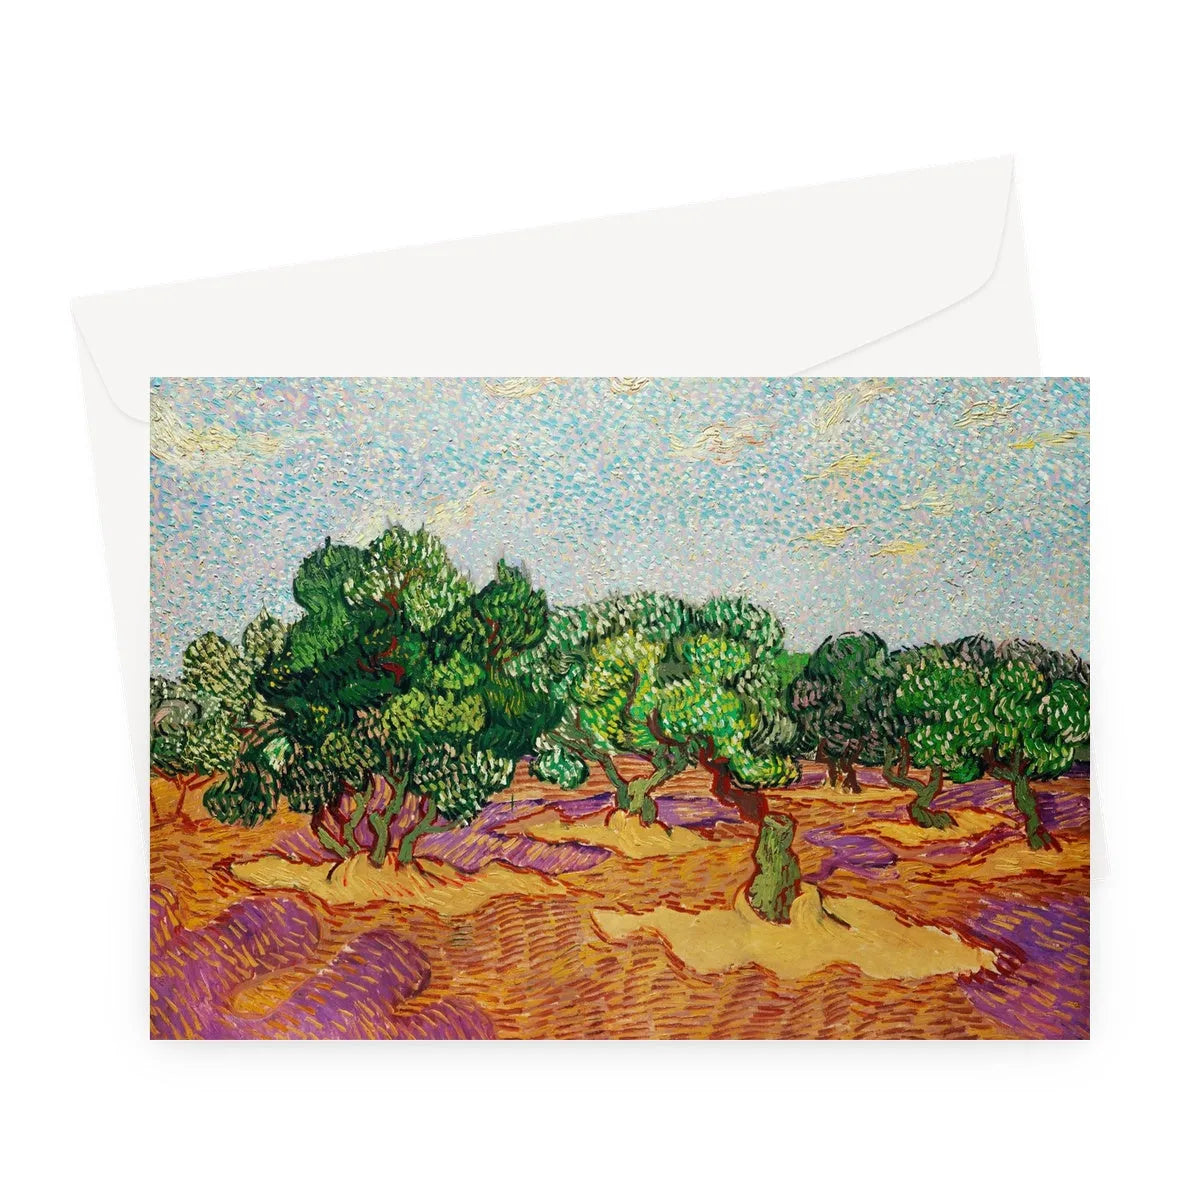 Olive Trees By Vincent Van Gogh Greeting Card - A5 Landscape / 1 Card - Greeting & Note Cards - Aesthetic Art